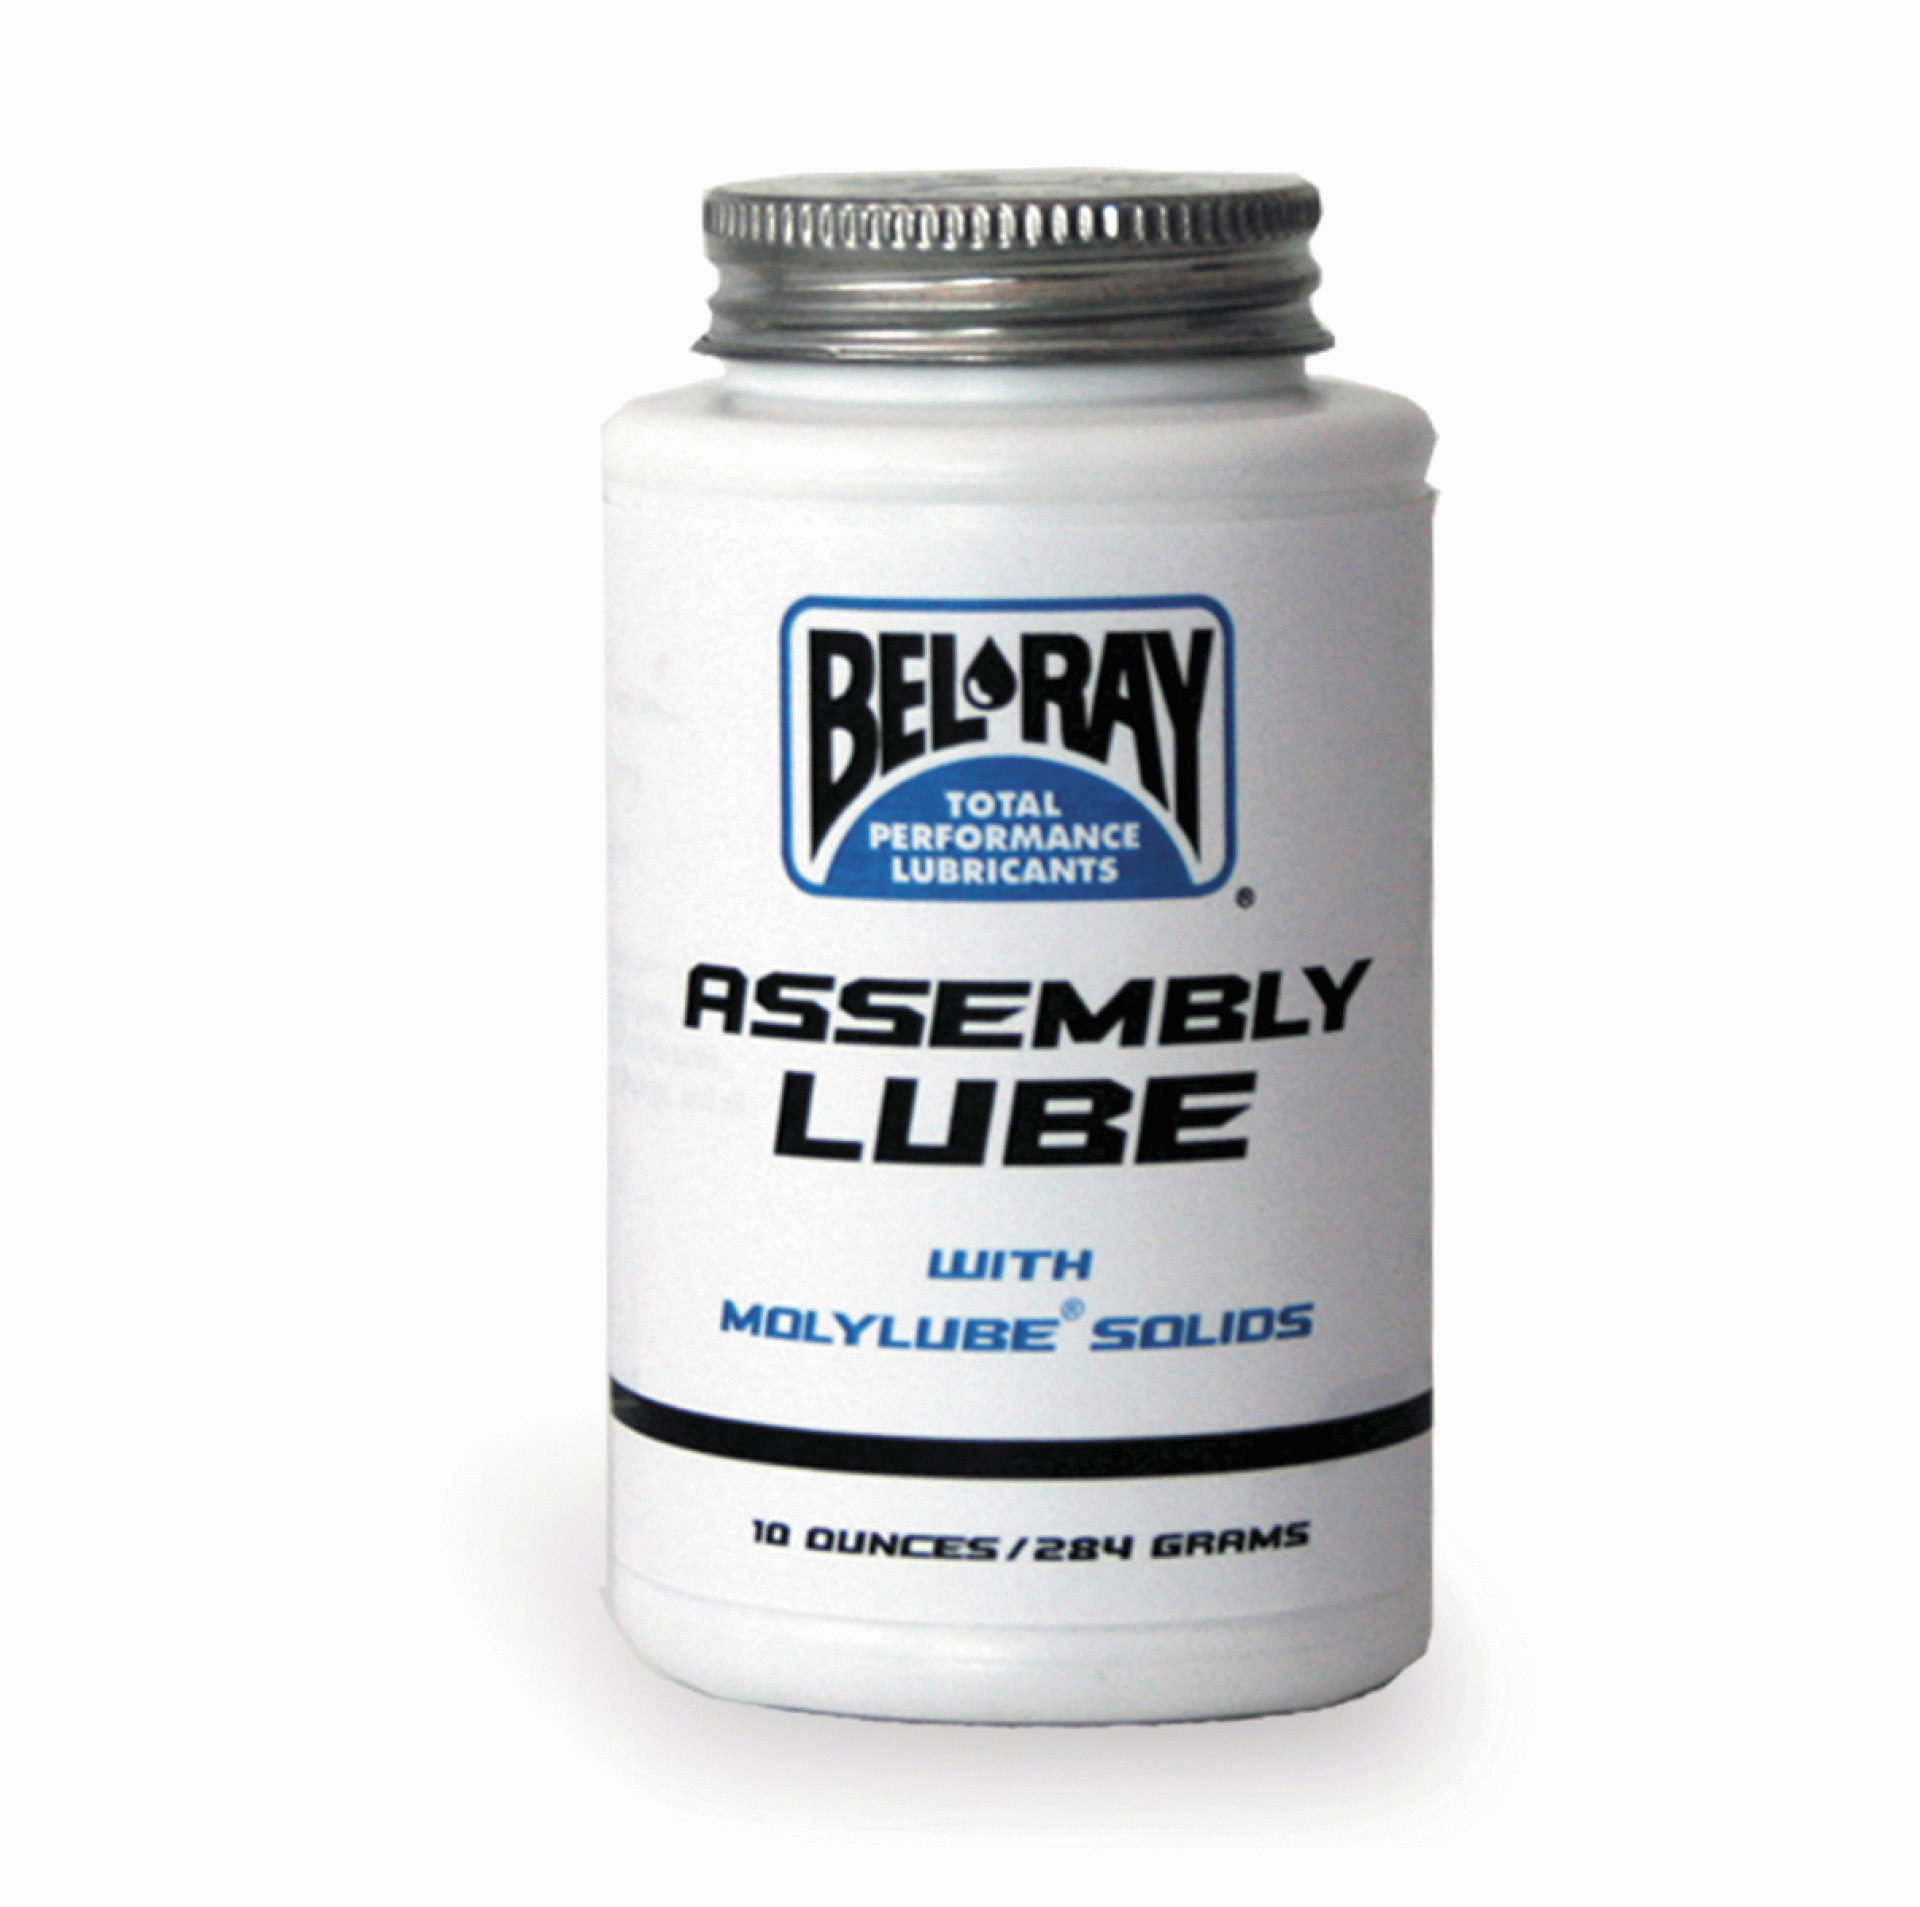 BEL-RAY COMPANY INC. | 99030-CaB10 | ASSEMBLY LUBE - 10 Oz. BRUSH TOP CAN